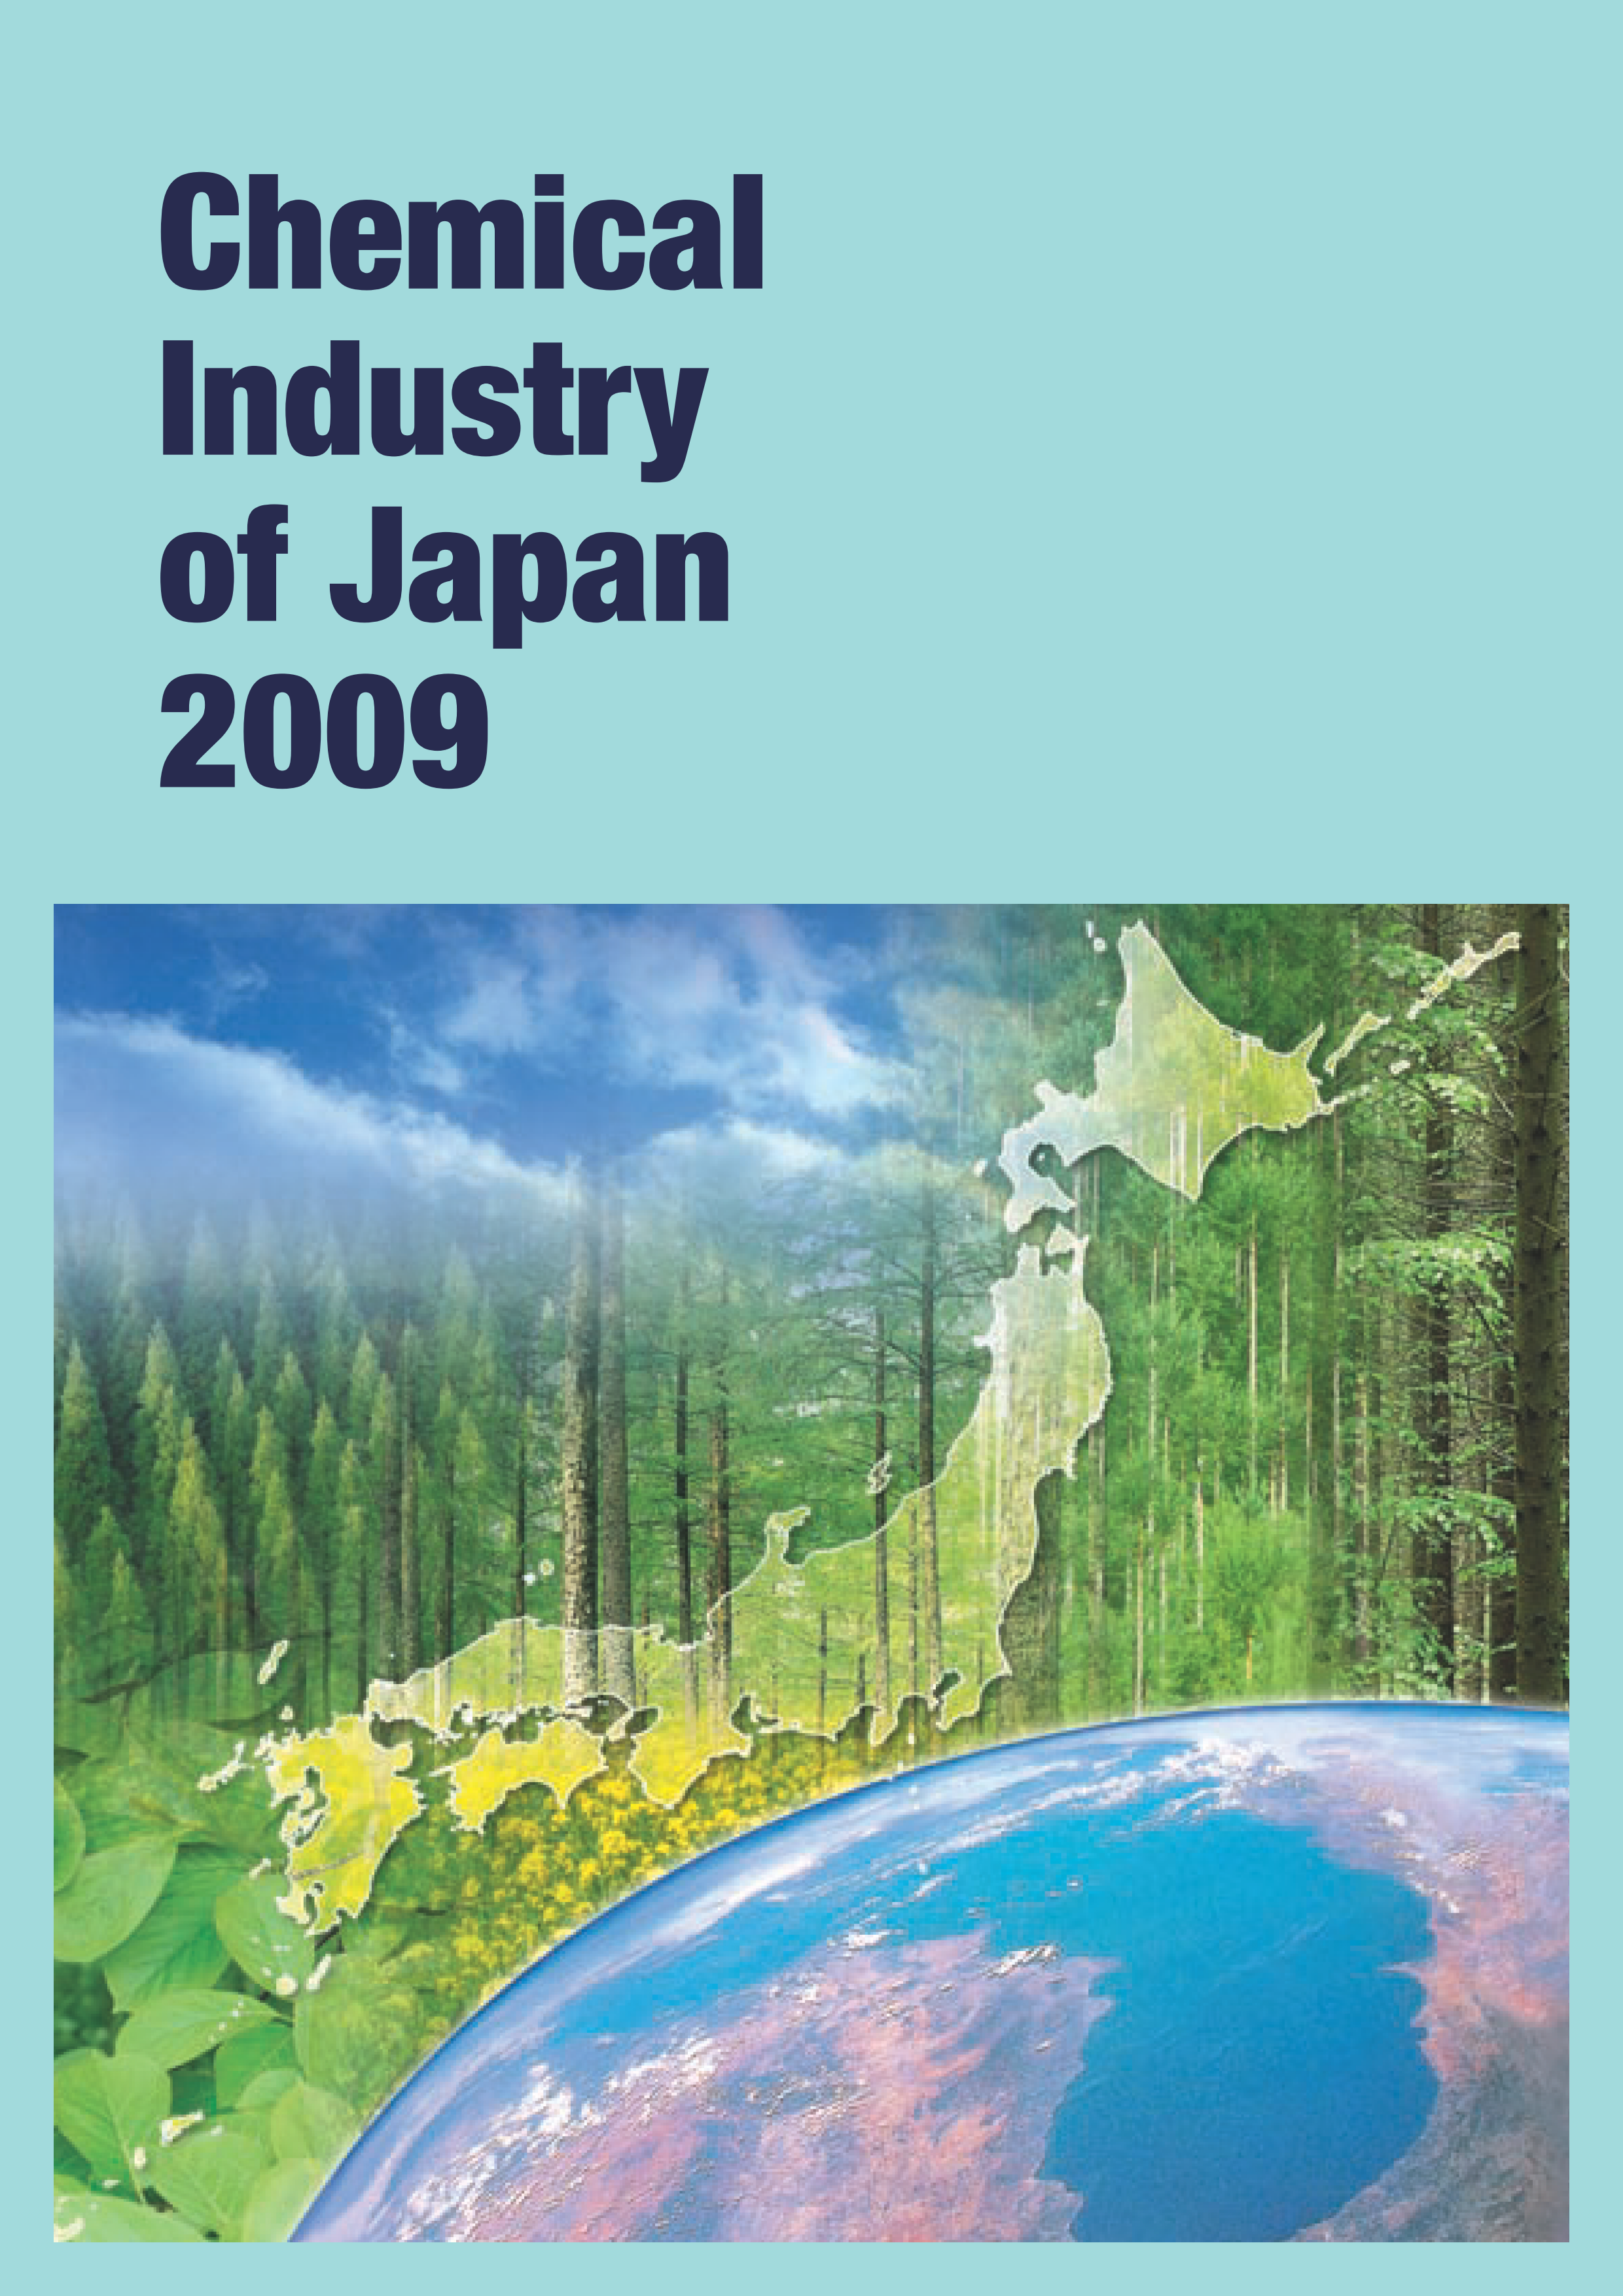 2009 CHEMICAL INDUSTRY OF JAPAN IN GRAPHS